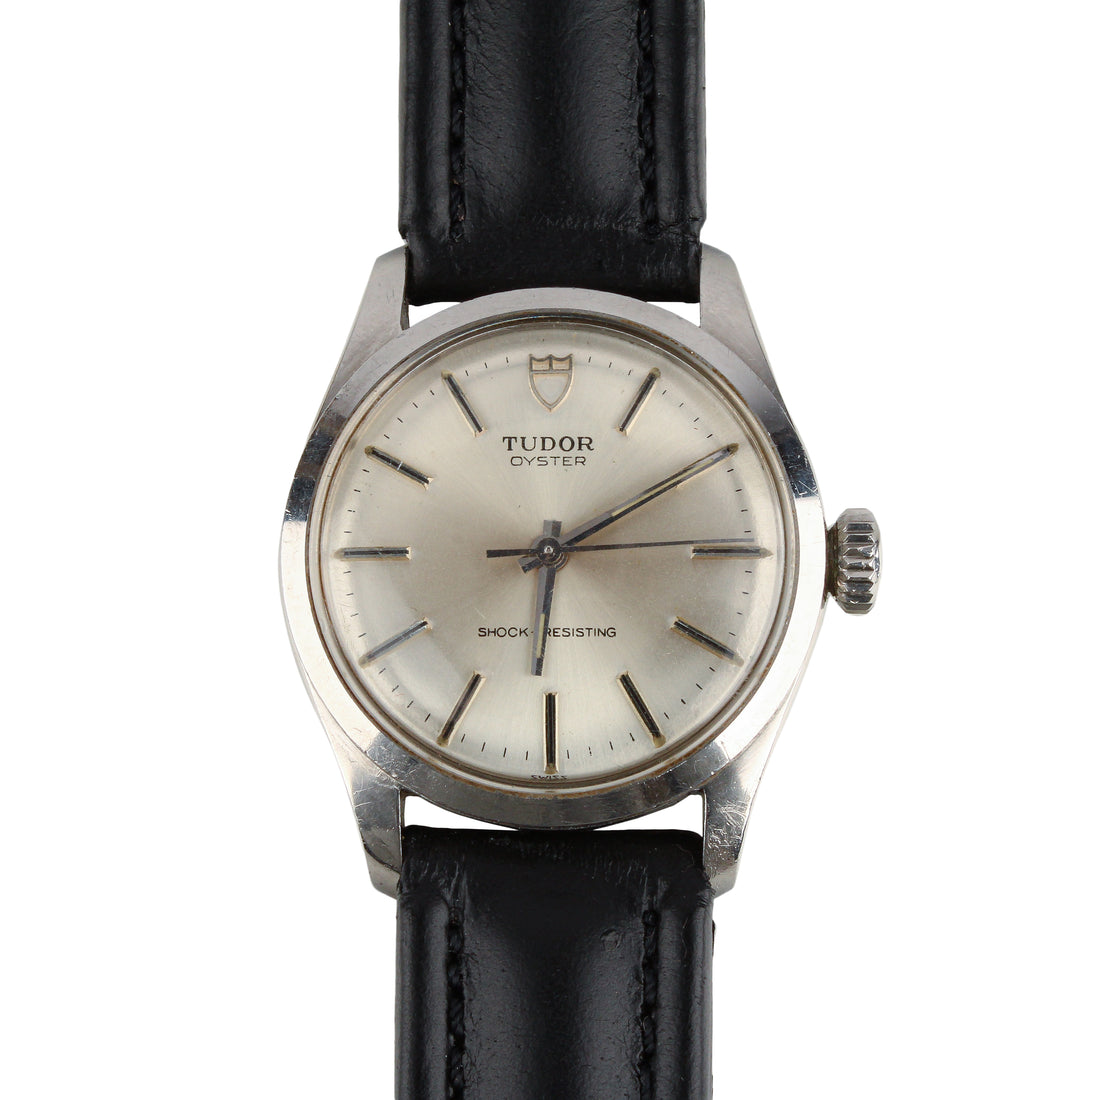 TUDOR Oyster Stainless Steel Watch